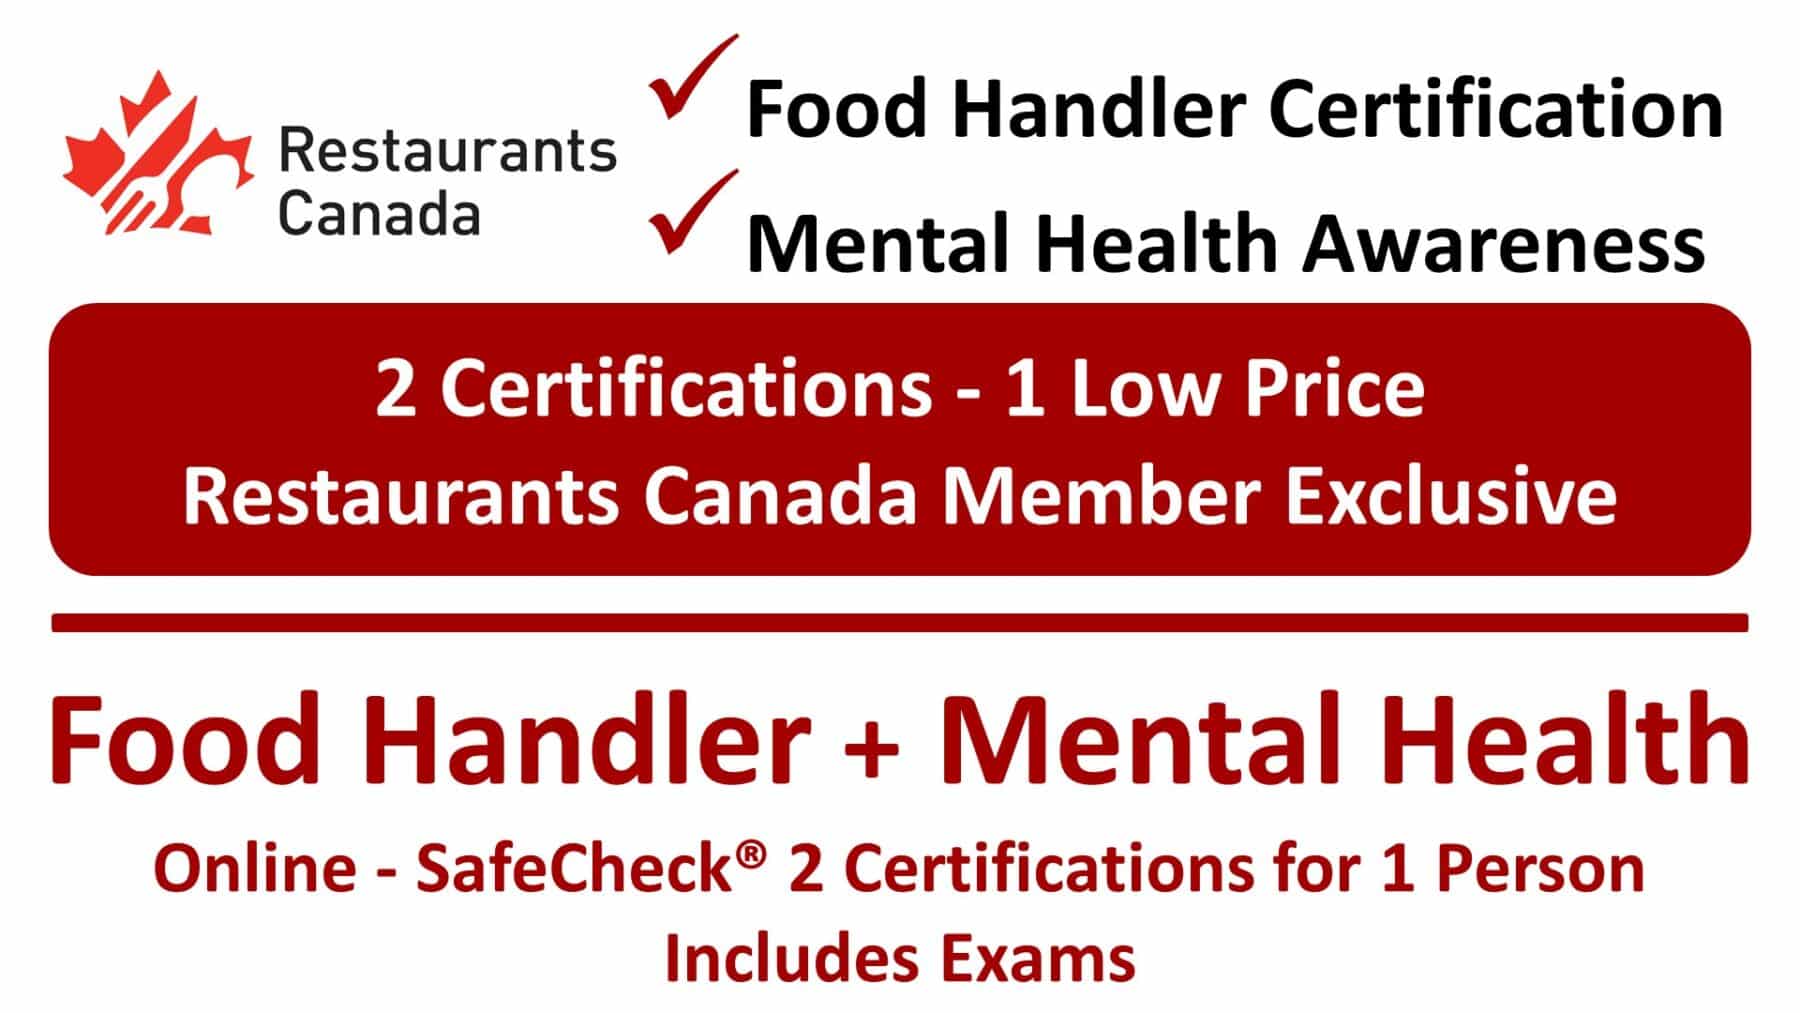 SafeCheck Food Safety Certification Course - Restaurants Canada Member Exlusive With Bonus Mental Health Awareness Course